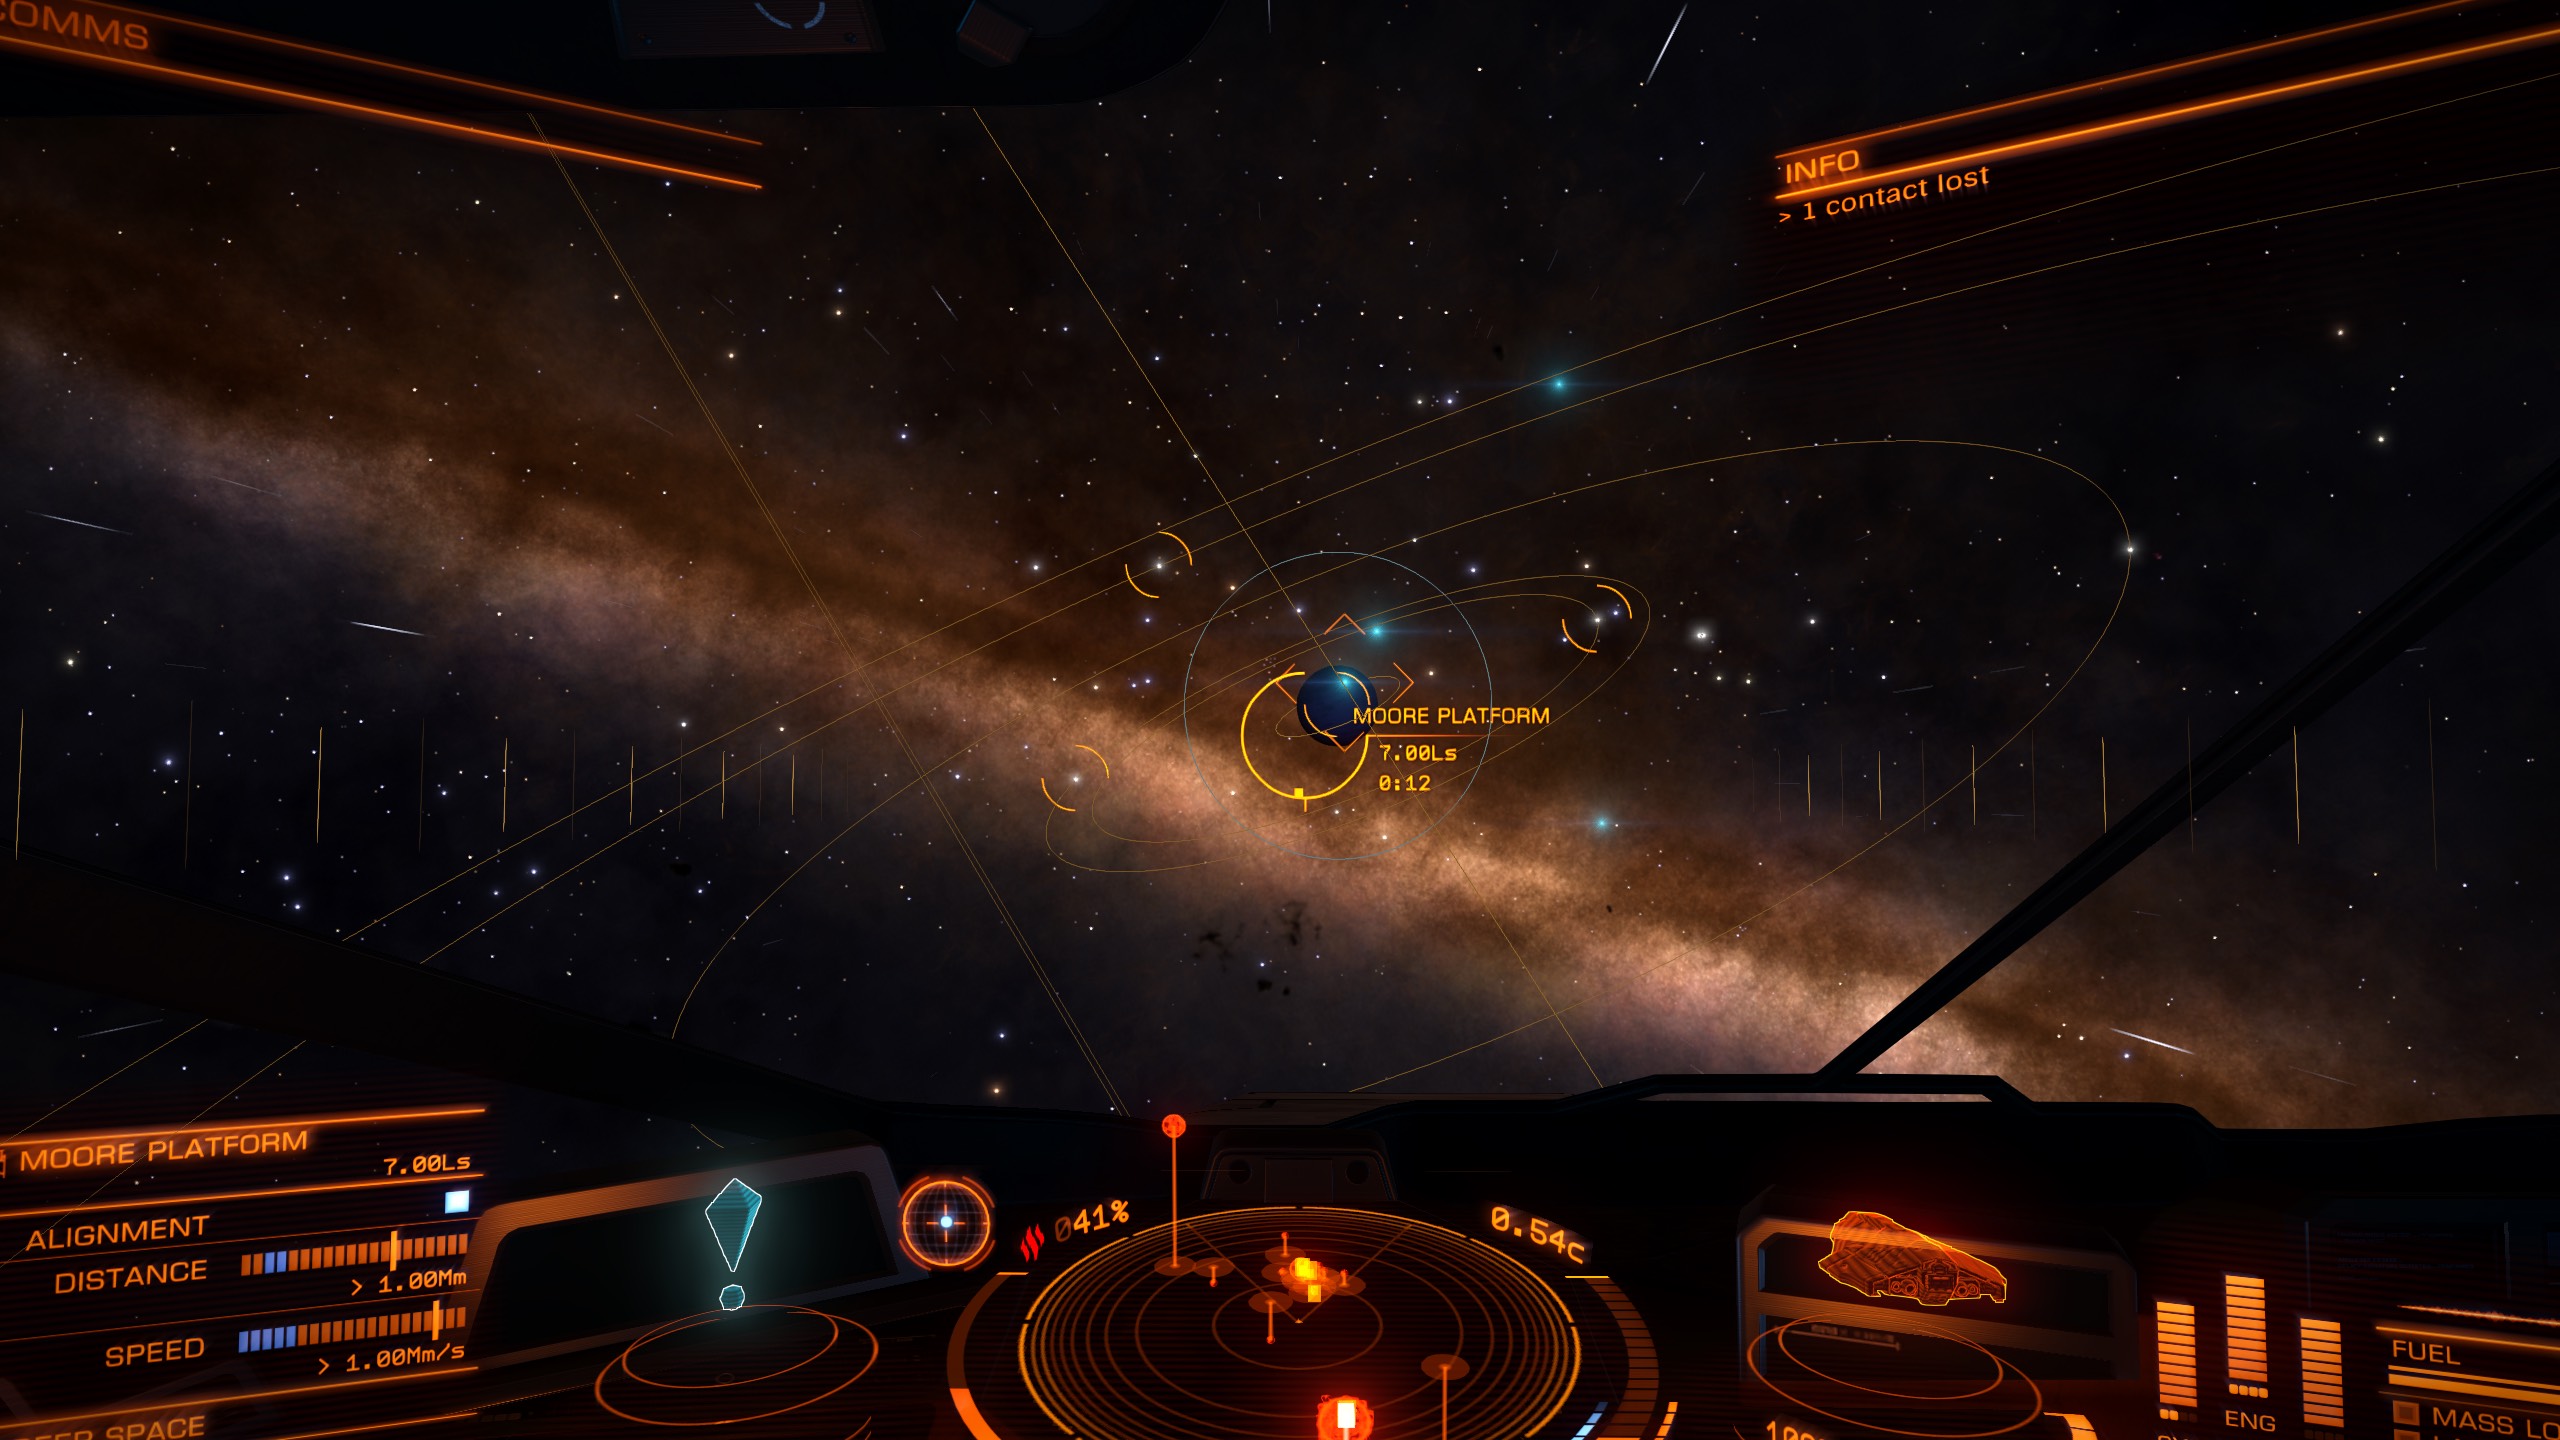 Why I Play: Elite Dangerous is the space sandbox we've been